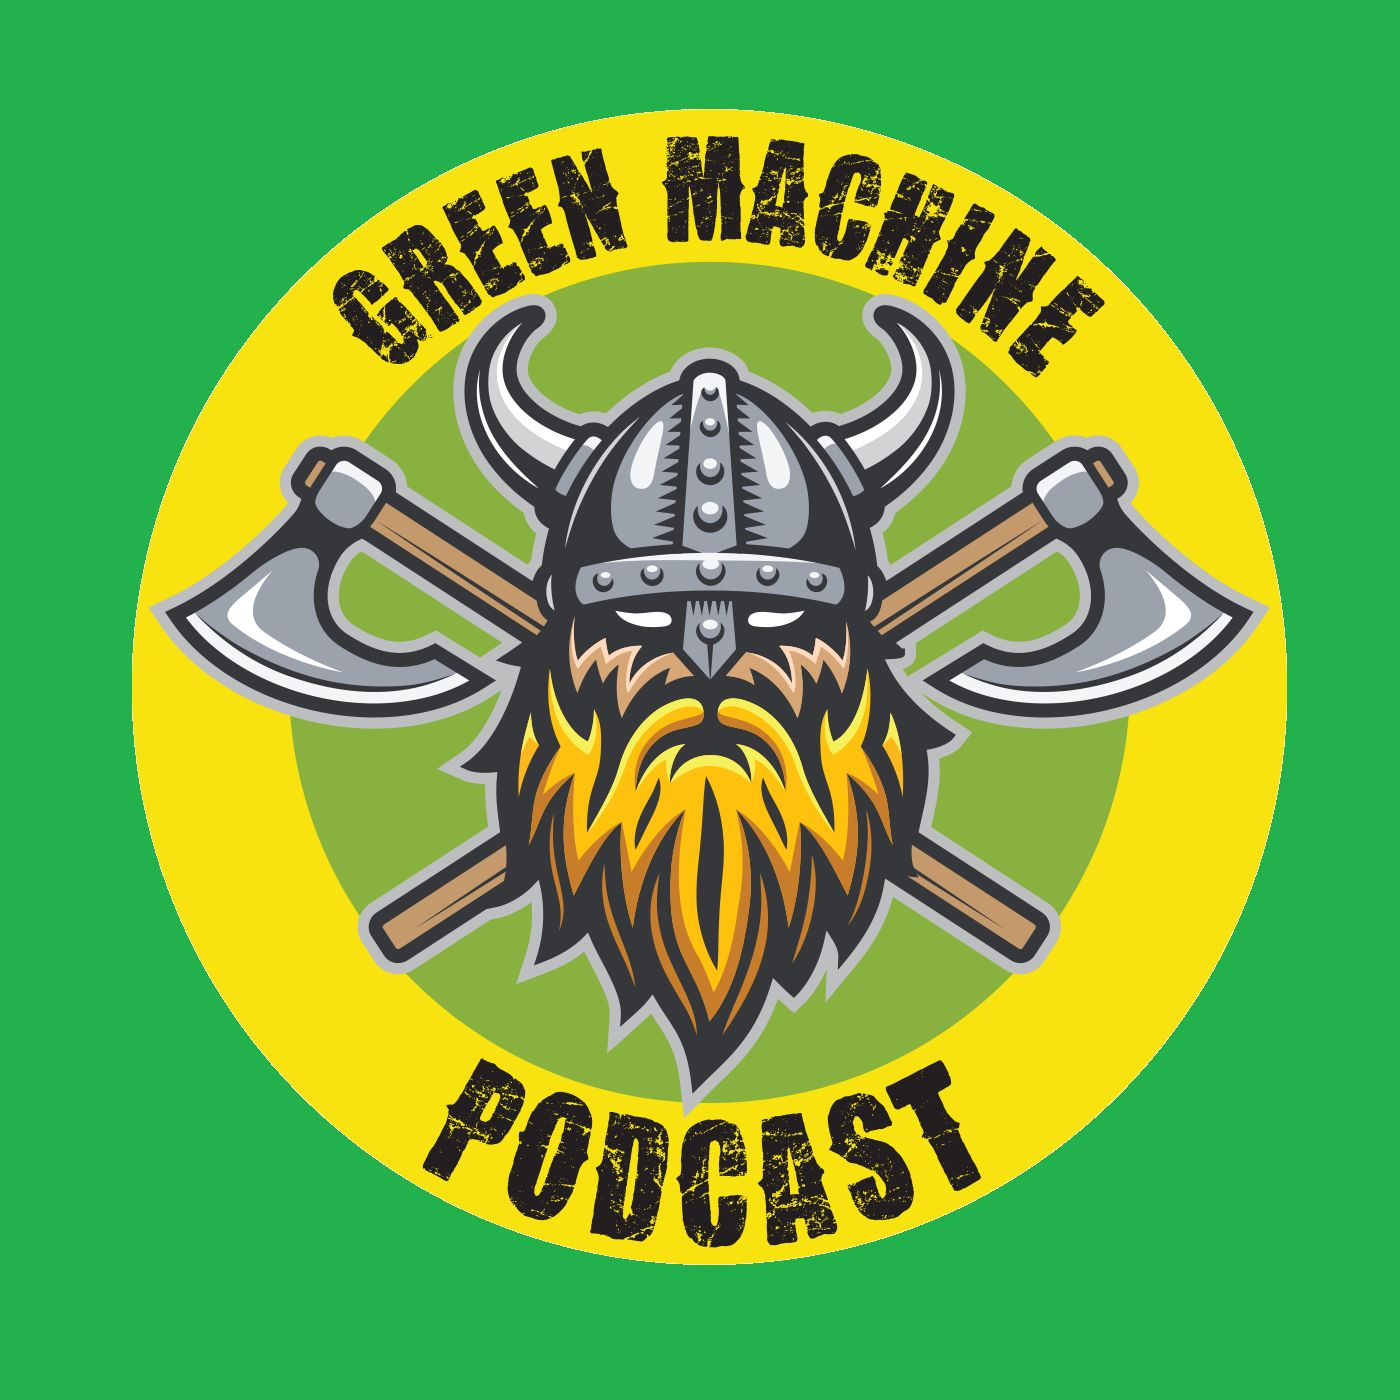 Green Machine Podcast - Episode 193 - Drop The Mike